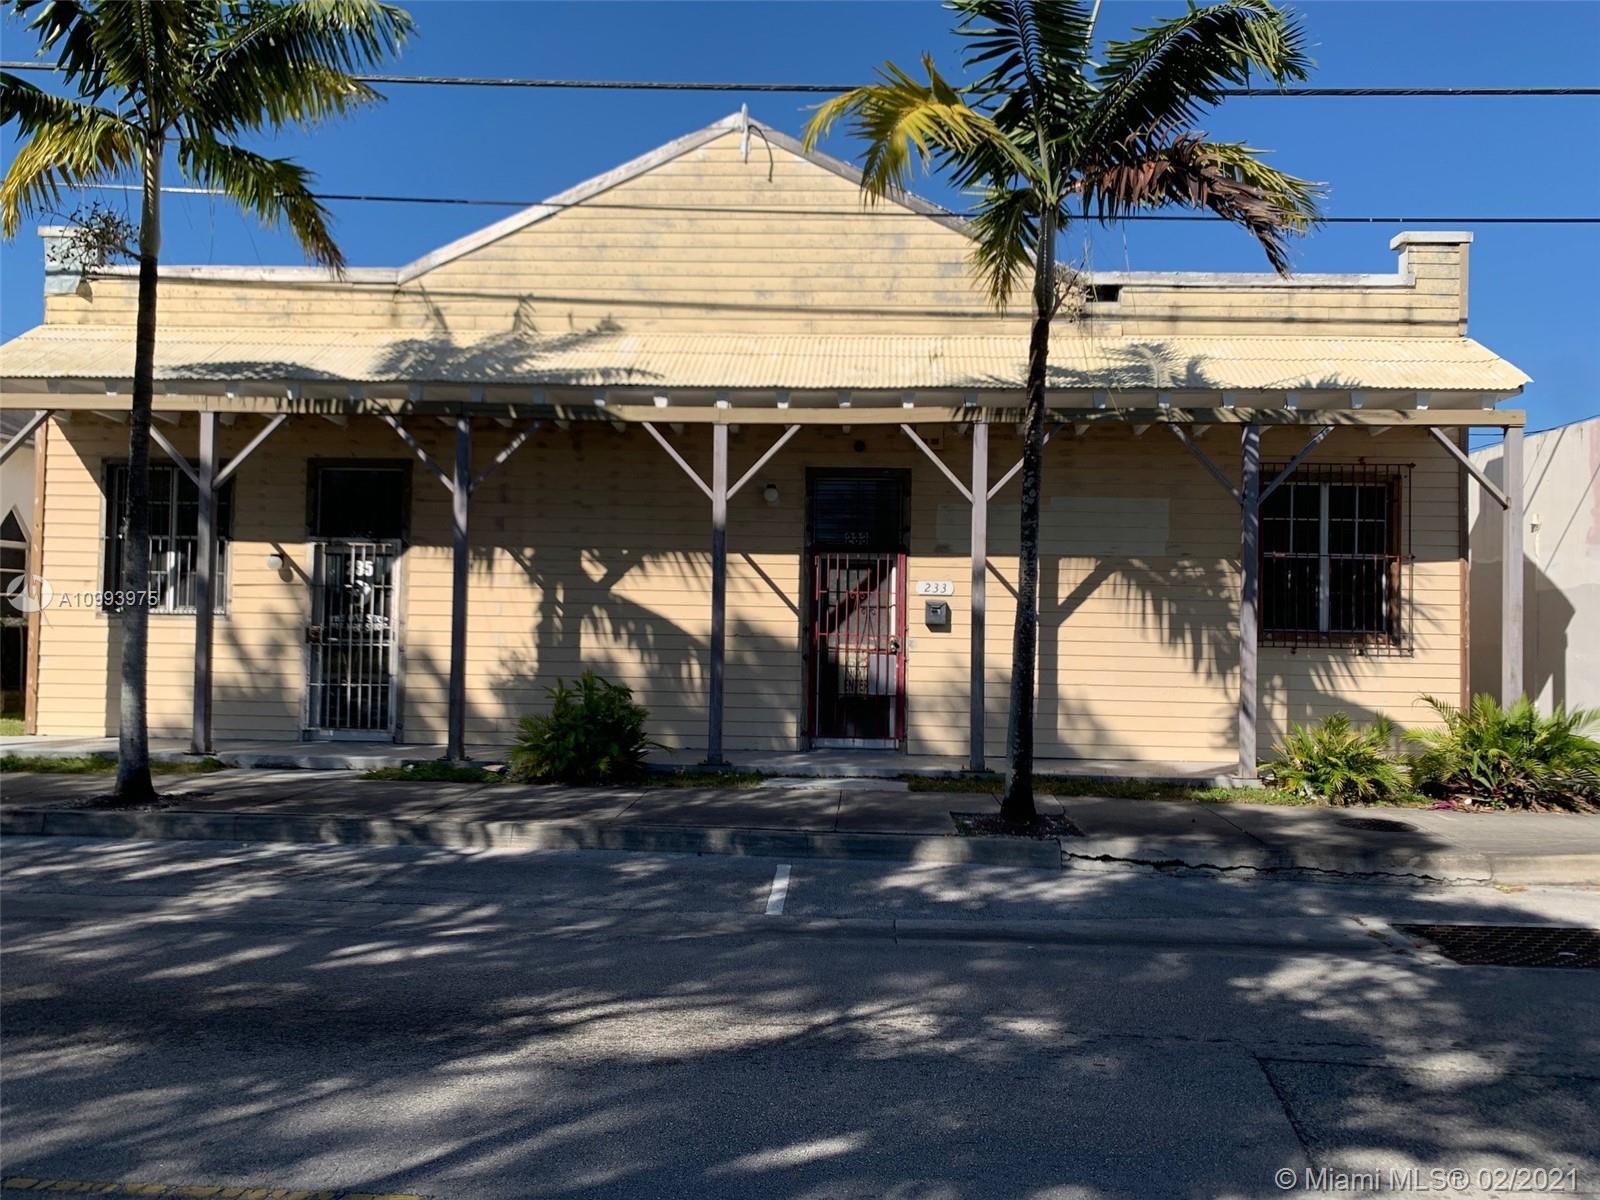 233 4th St 233-235, Homestead, RETAIL SPACE,  sold, Test Realtyworld broker